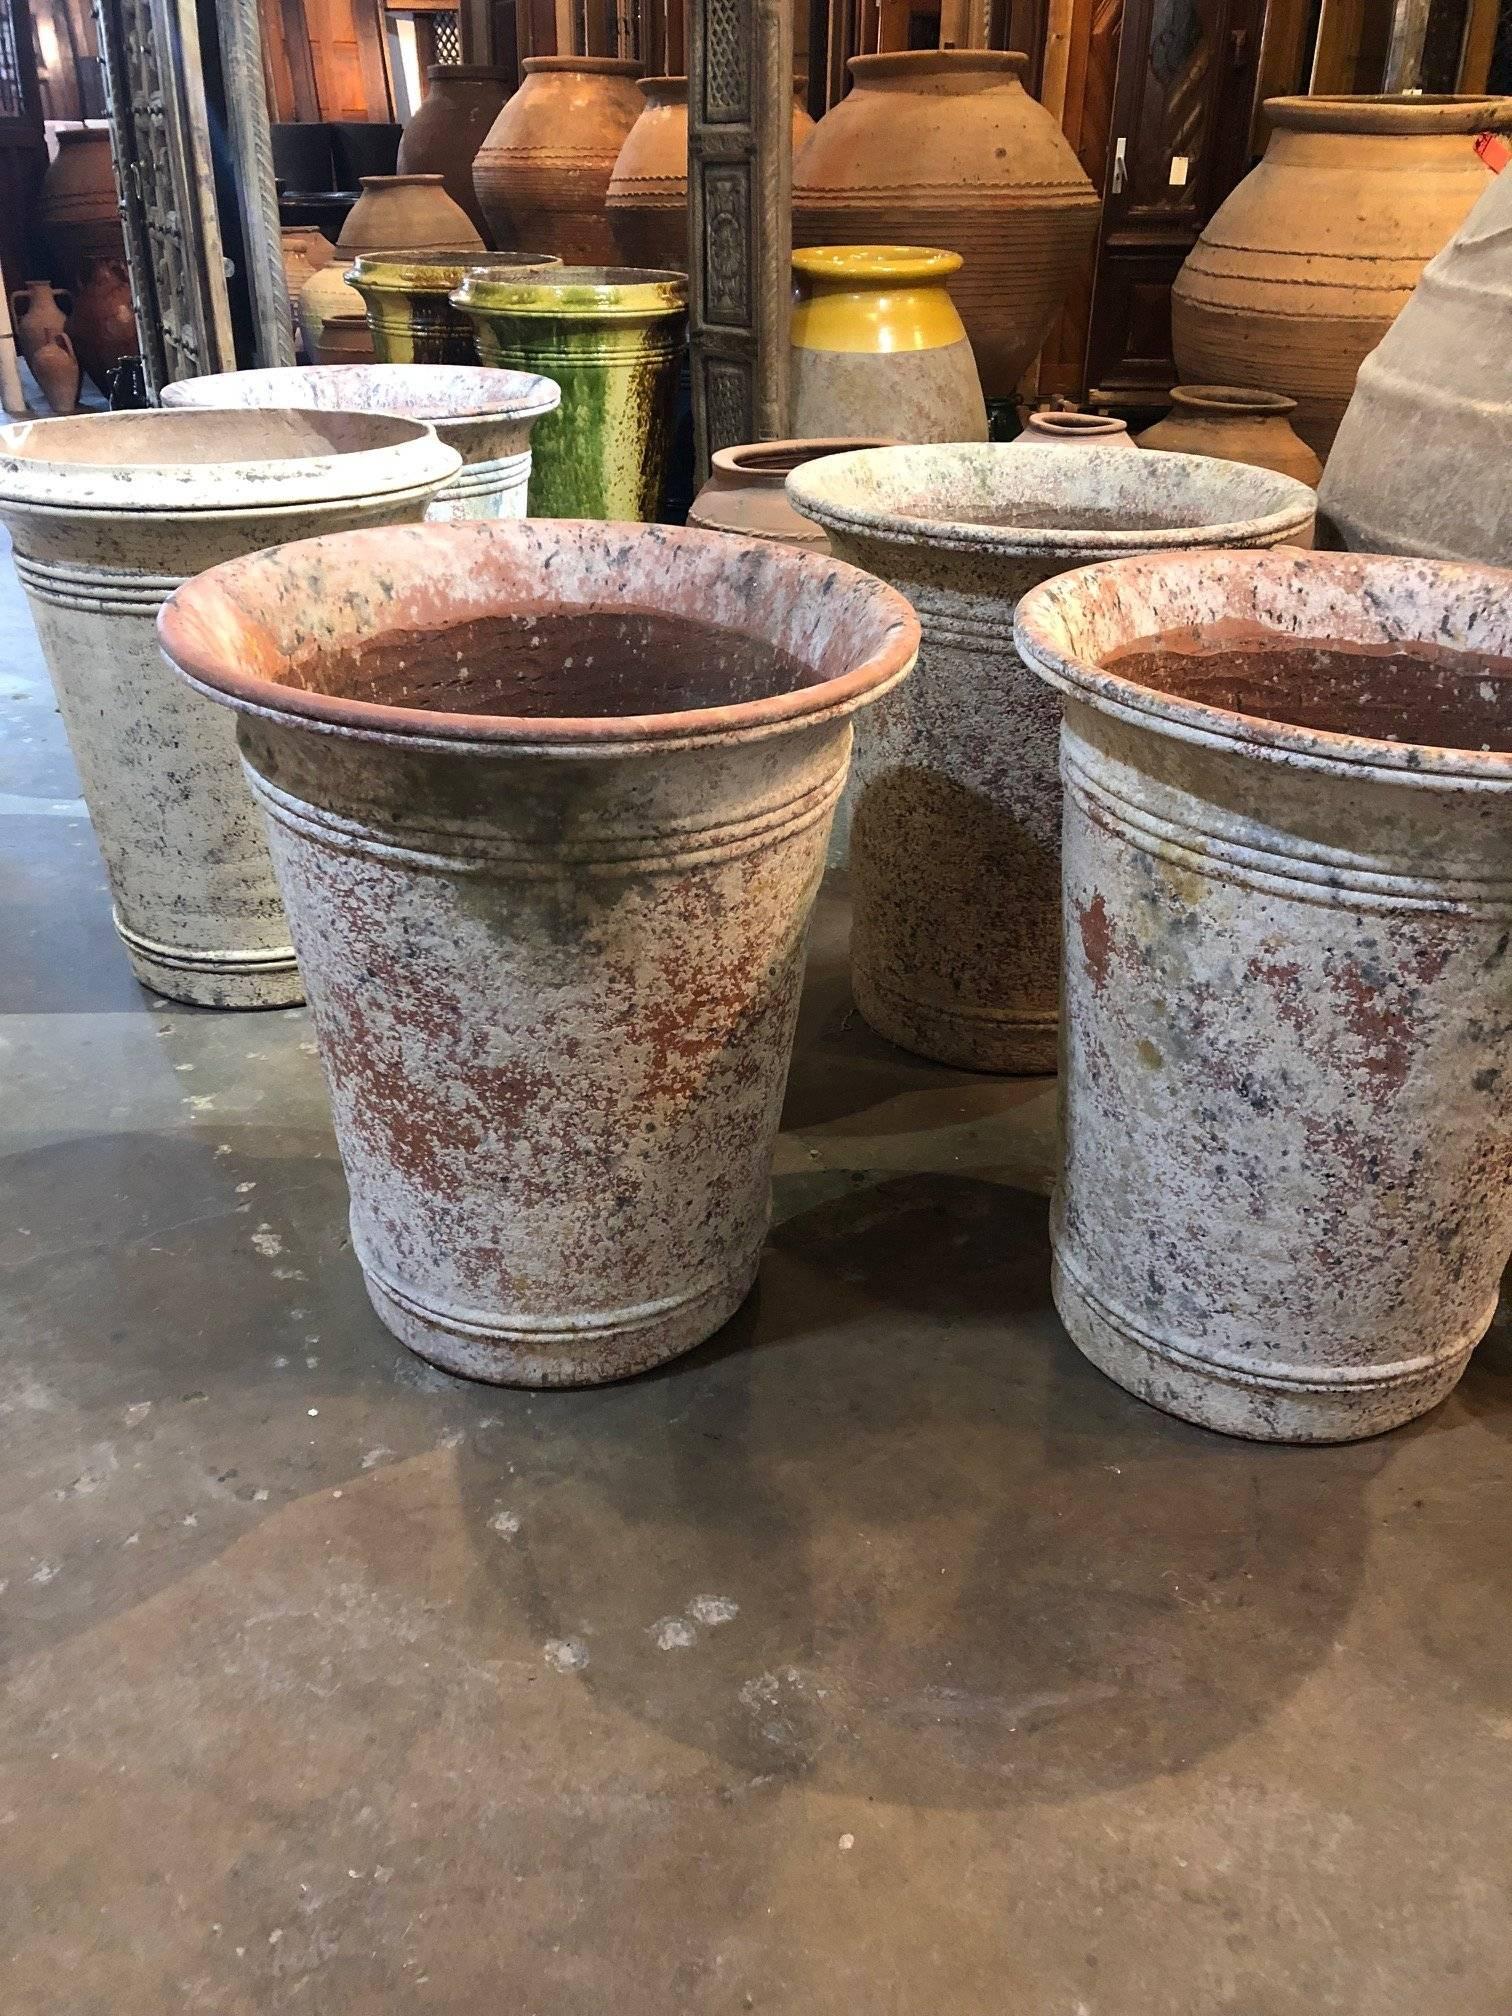 Various large, contemporary, terra cotta planters. Terracotta is a type of clay that is commonly used in making pots and planters of various sizes and shapes. Terracotta pots can be as small as two inches in diameter or height, and as large as the